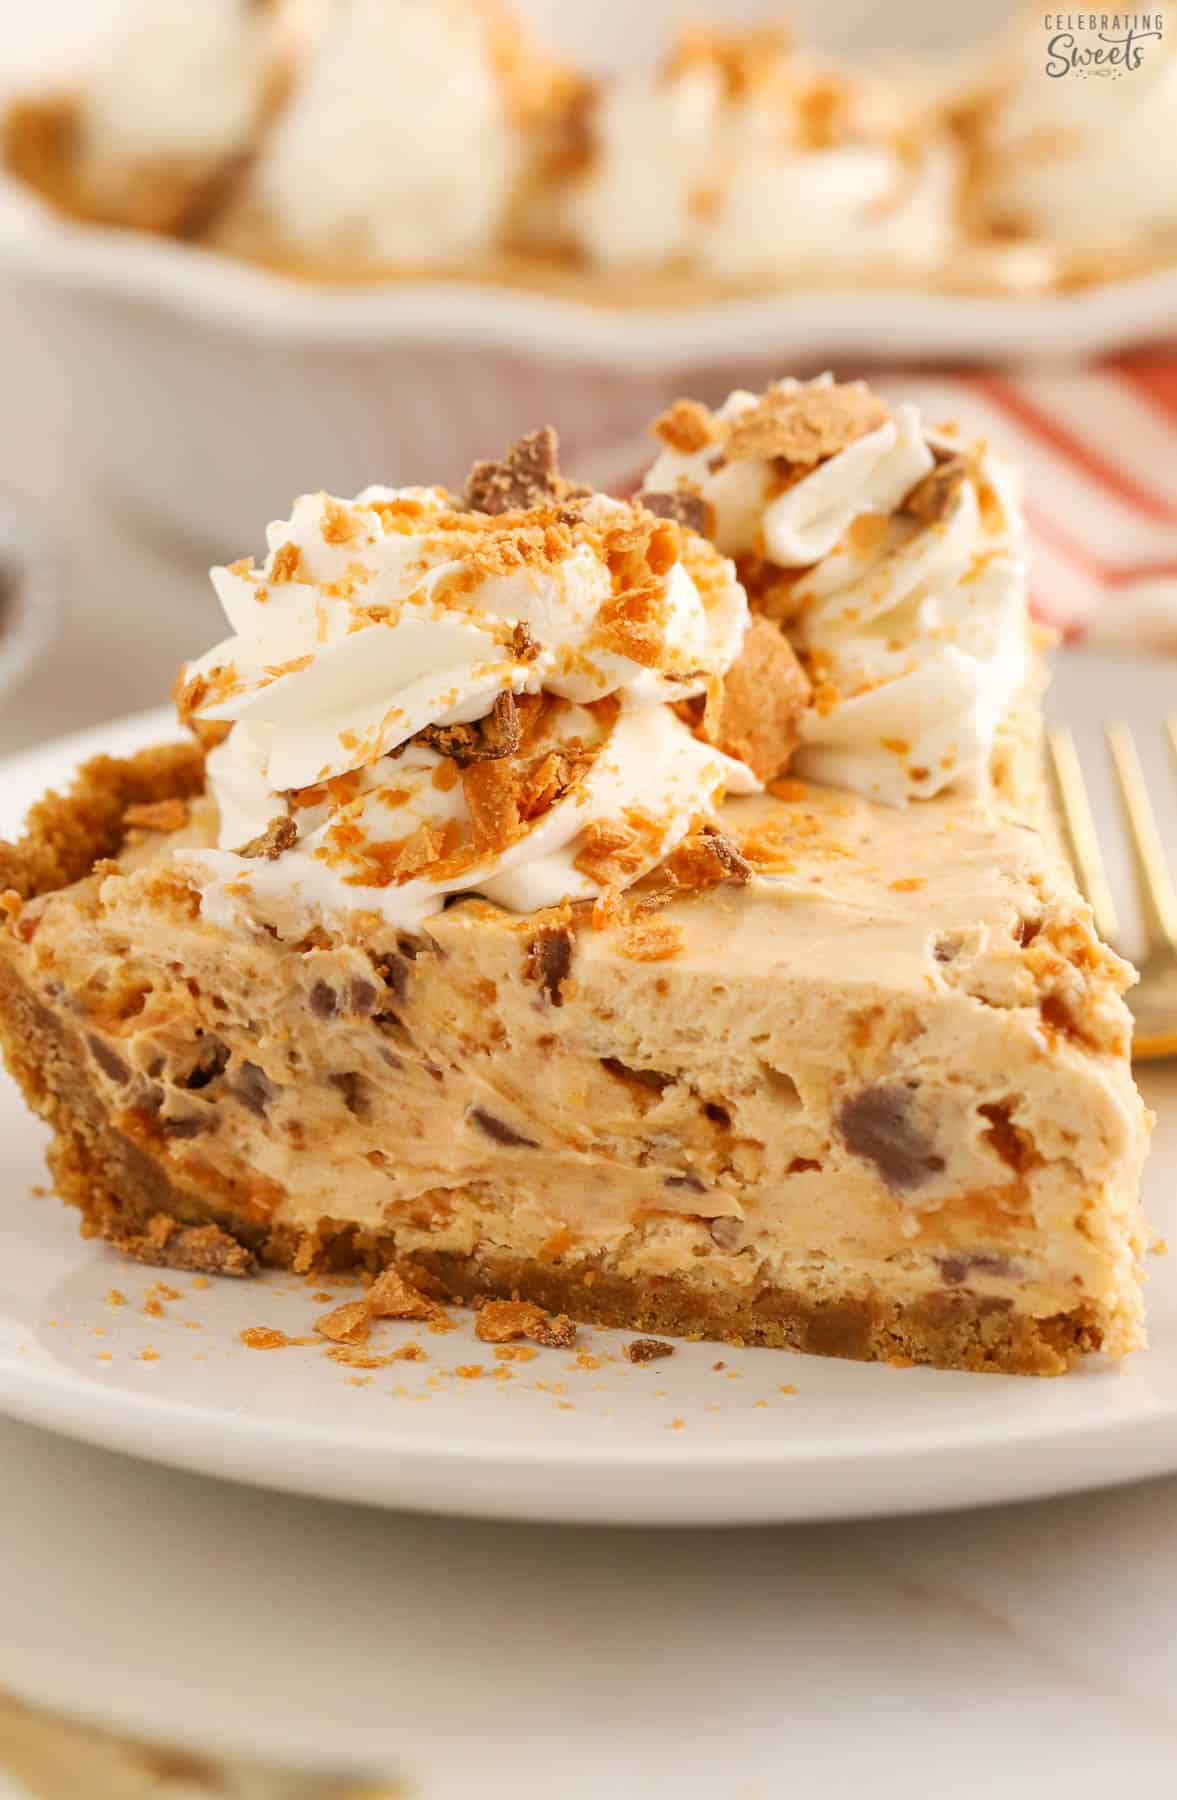 Slice of Butterfinger pie on a white plate garnished with whipped cream and crushed Butterfinger.